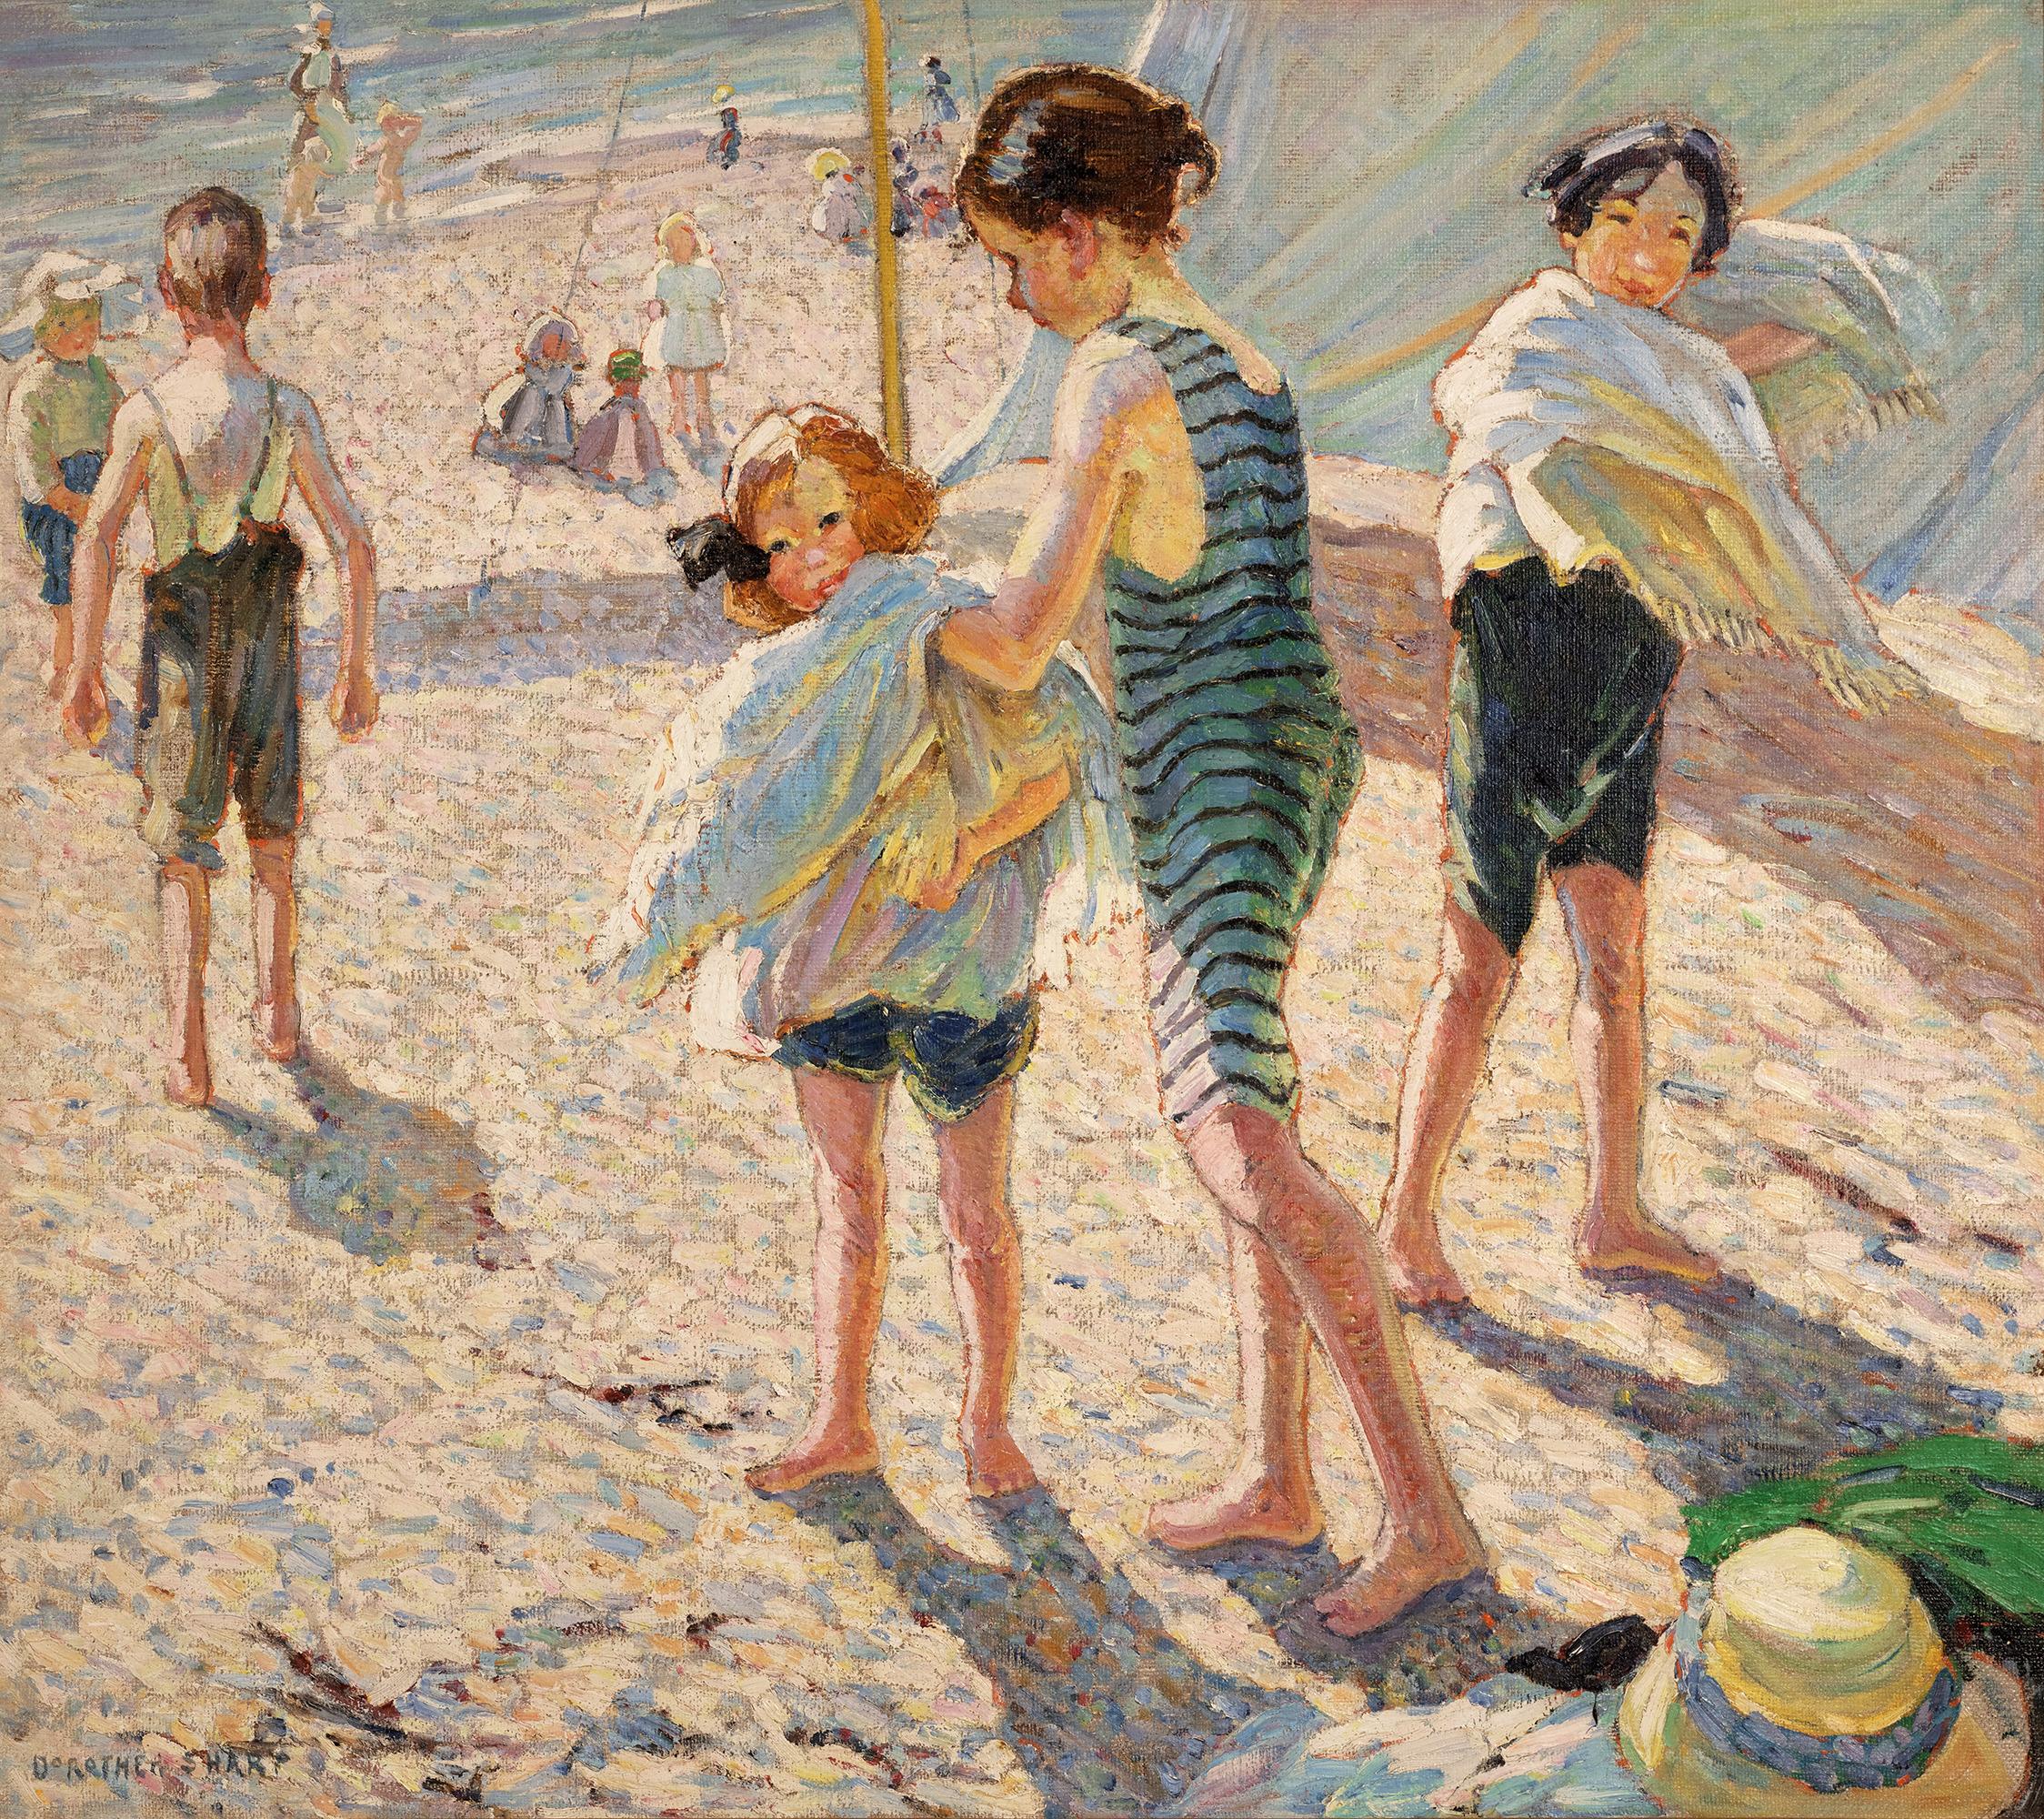 Dorothea Sharp
1874-1955  British

A Day on the Beach

Signed "Dorothea Sharp" (lower left)
Oil on canvas

British painter Dorothea Sharp captures the joyful spirit of childhood in this enchanting seaside scene. The work, entitled A Day on the